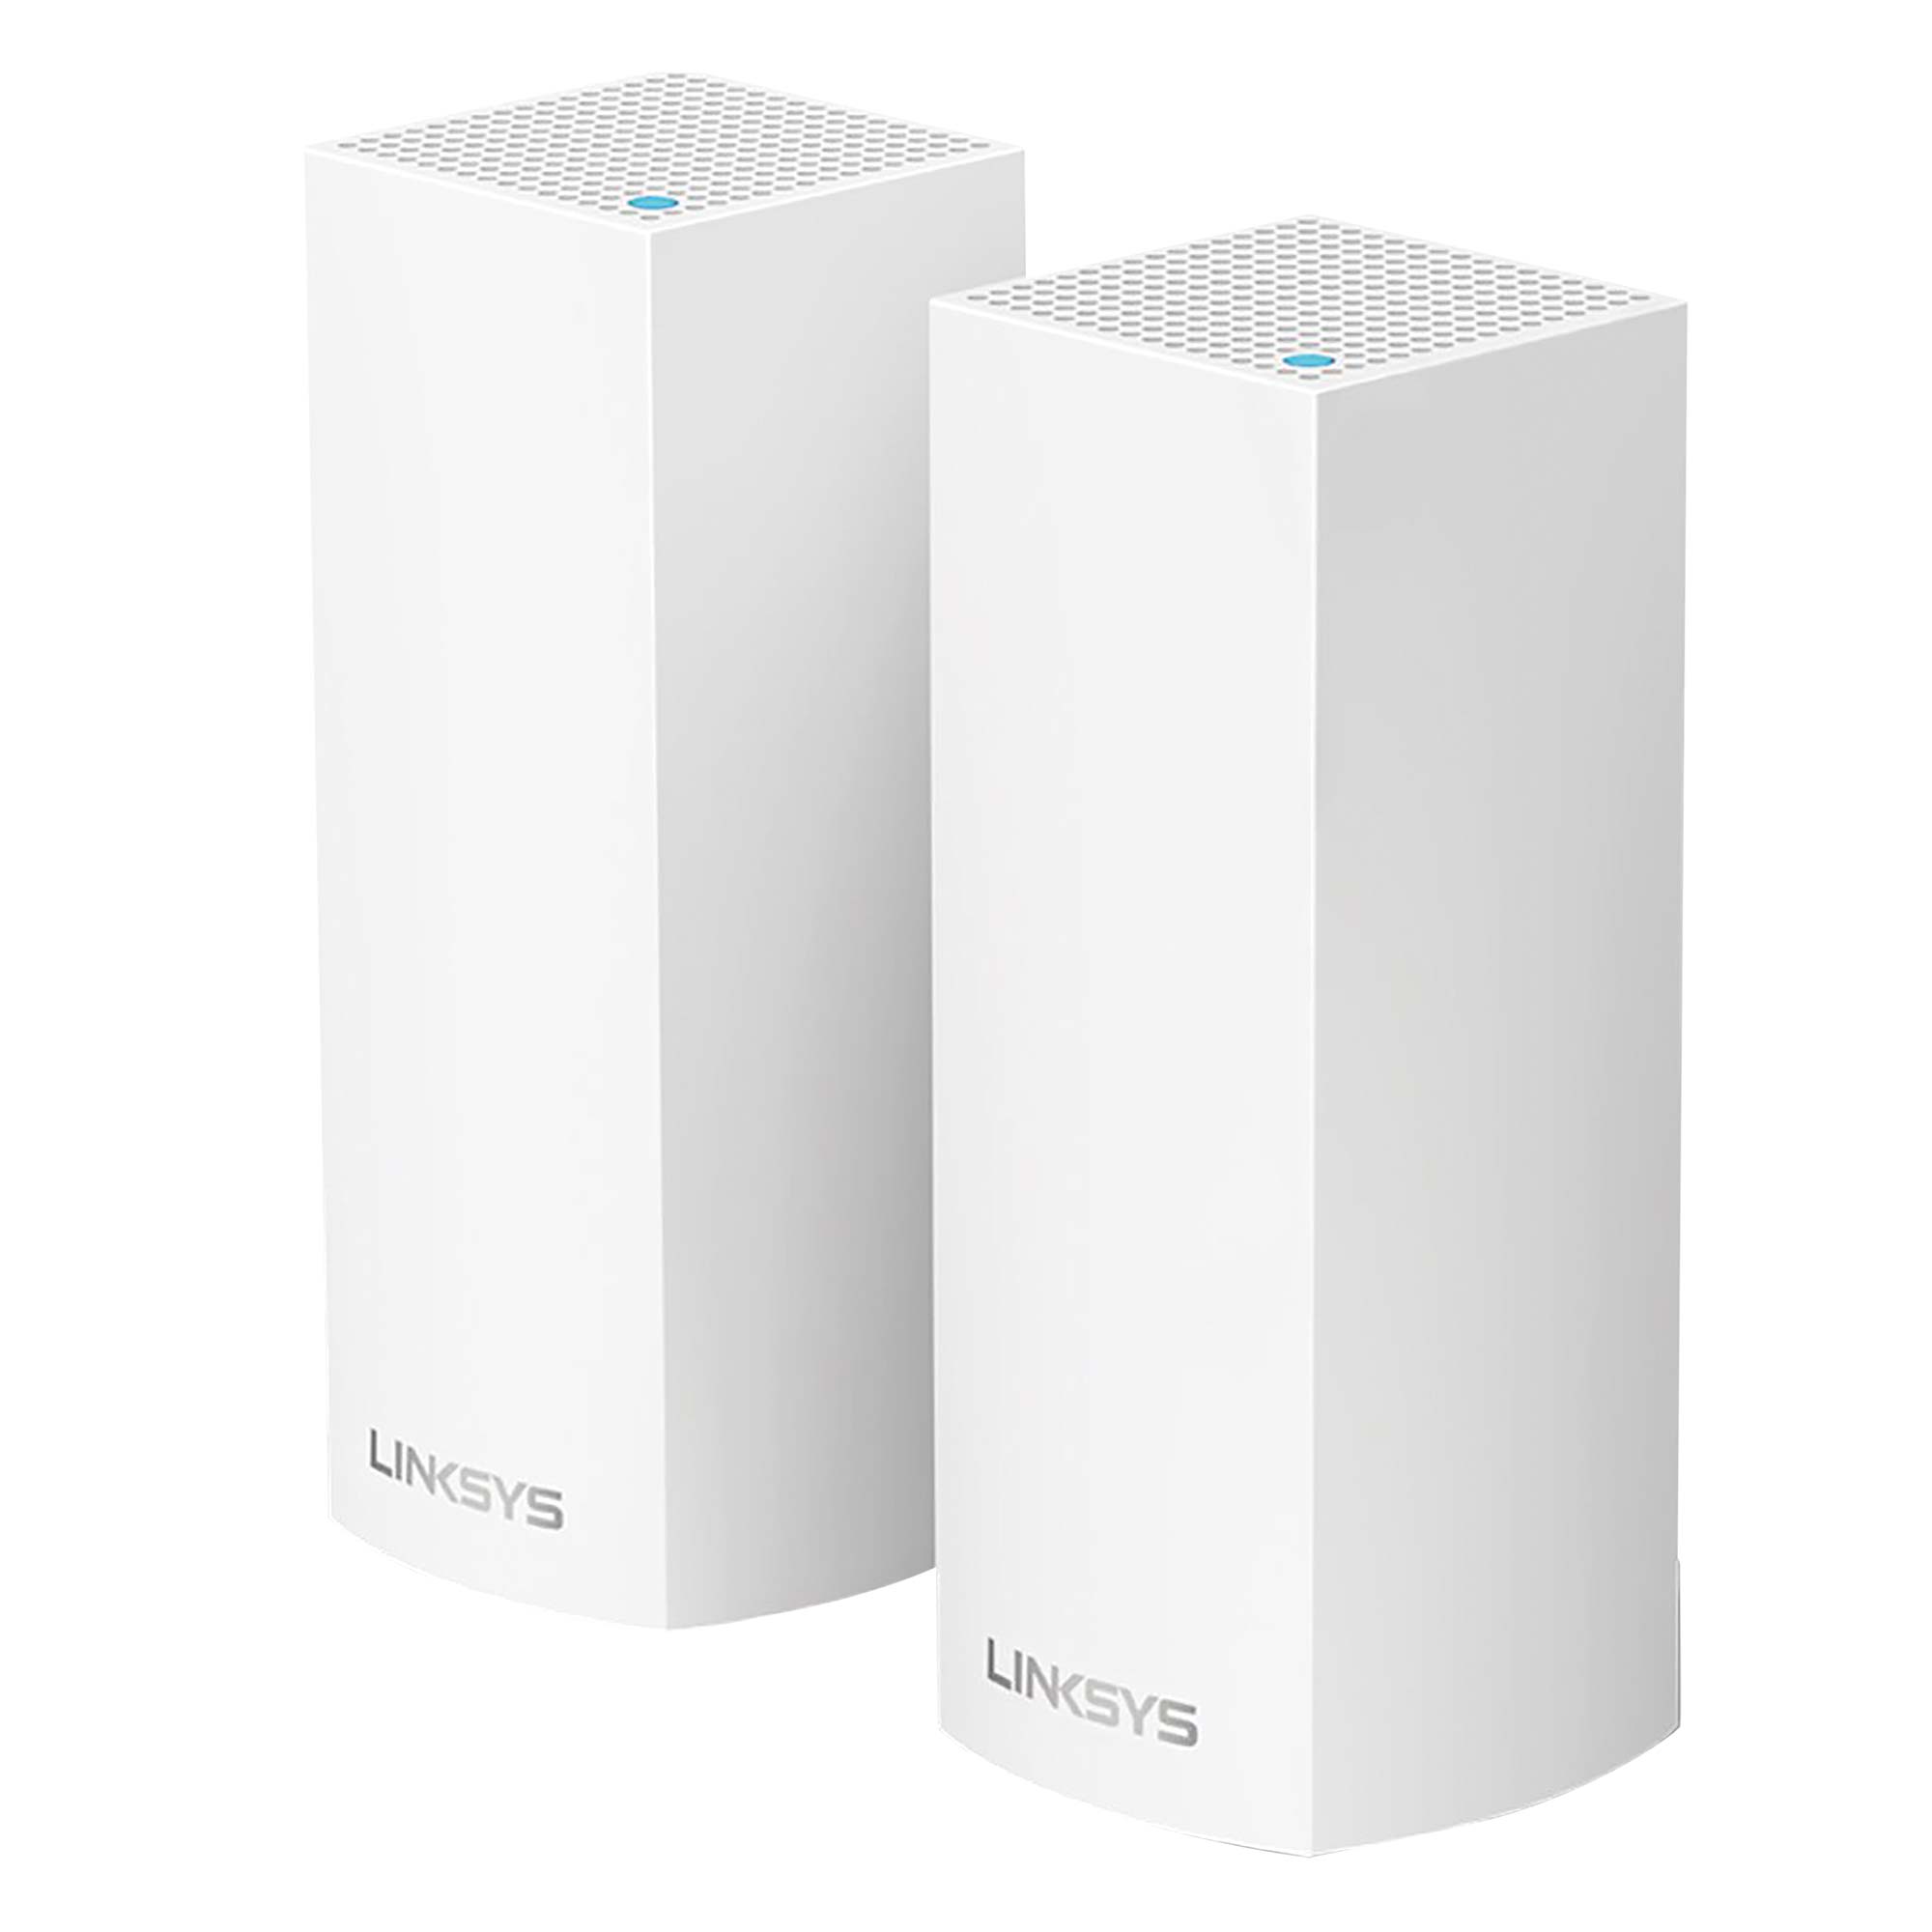 Linksys Mesh WiFi System - 2 Pack